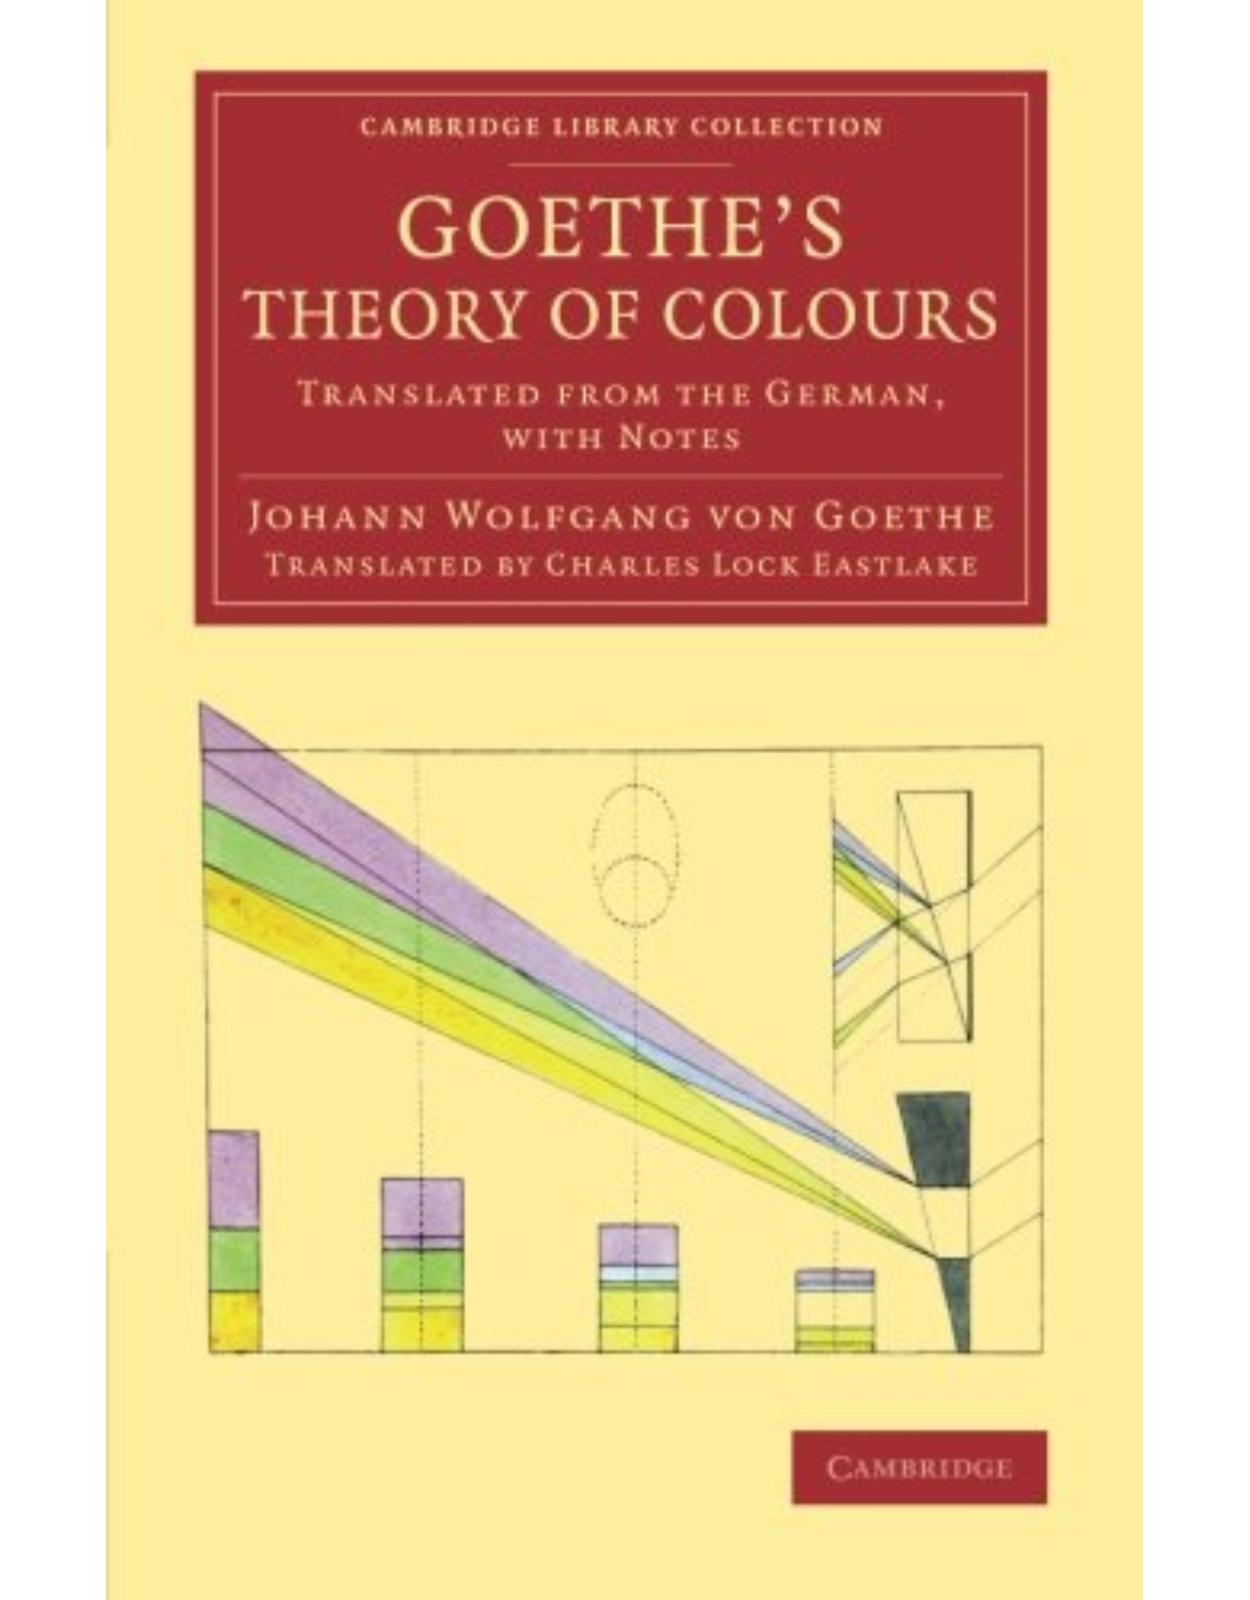 Goethe's Theory of Colours: Translated from the German, with Notes (Cambridge Library Collection - Art and Architecture)